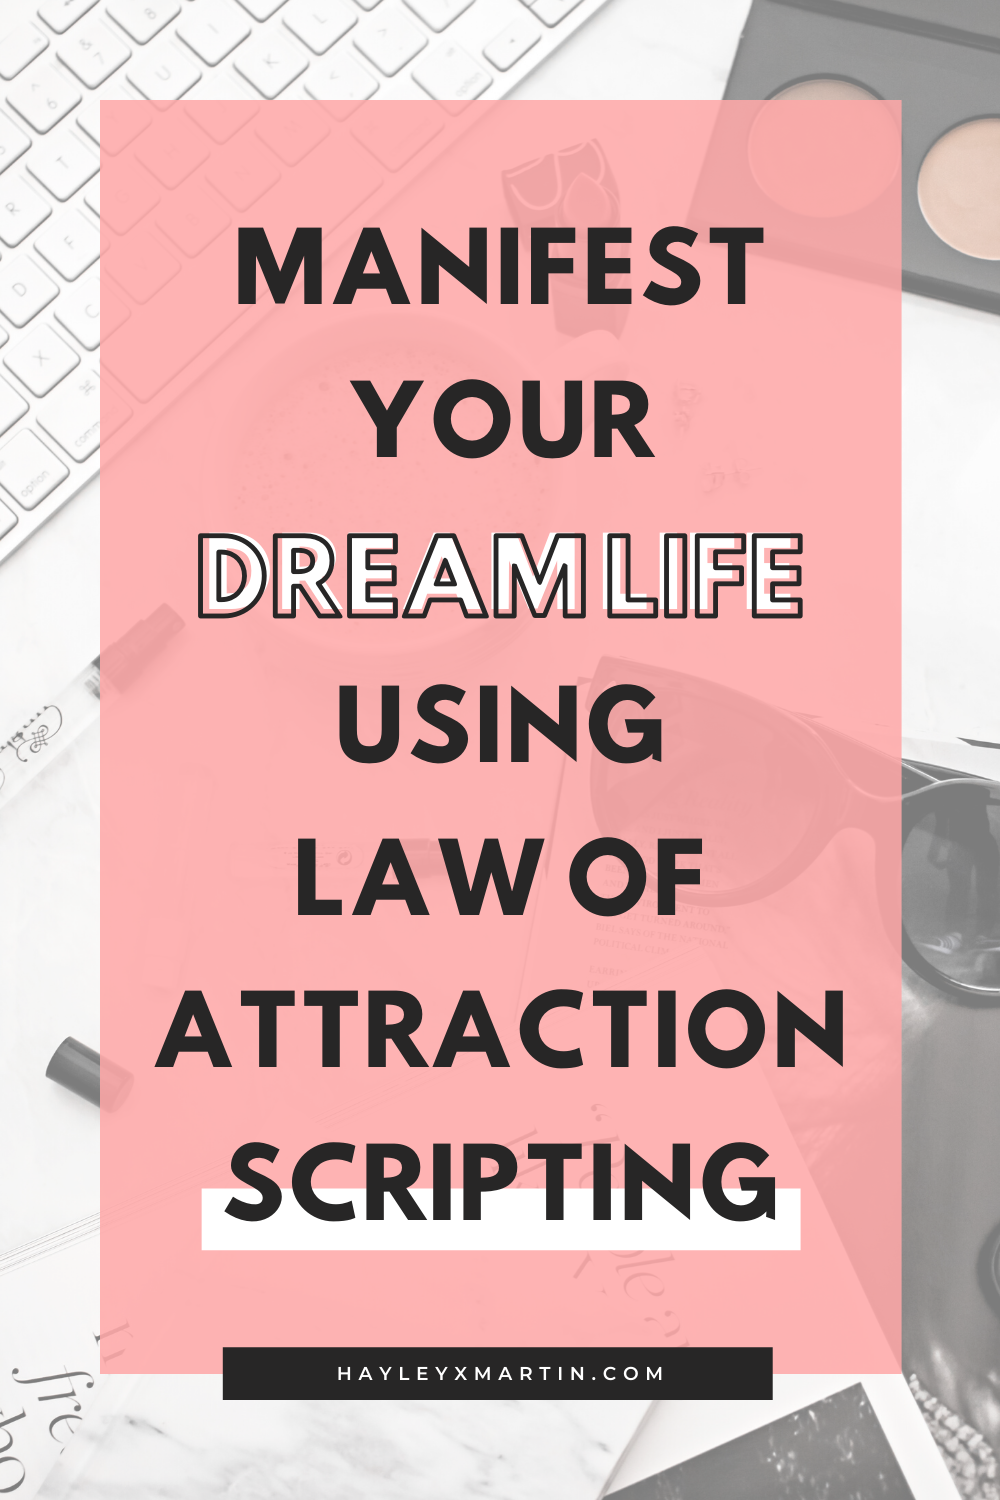 MANIFEST YOUR DREAM LIFE USING LAW OF ATTRACTION SCRIPTING | HAYLEYXMARTIN.COM